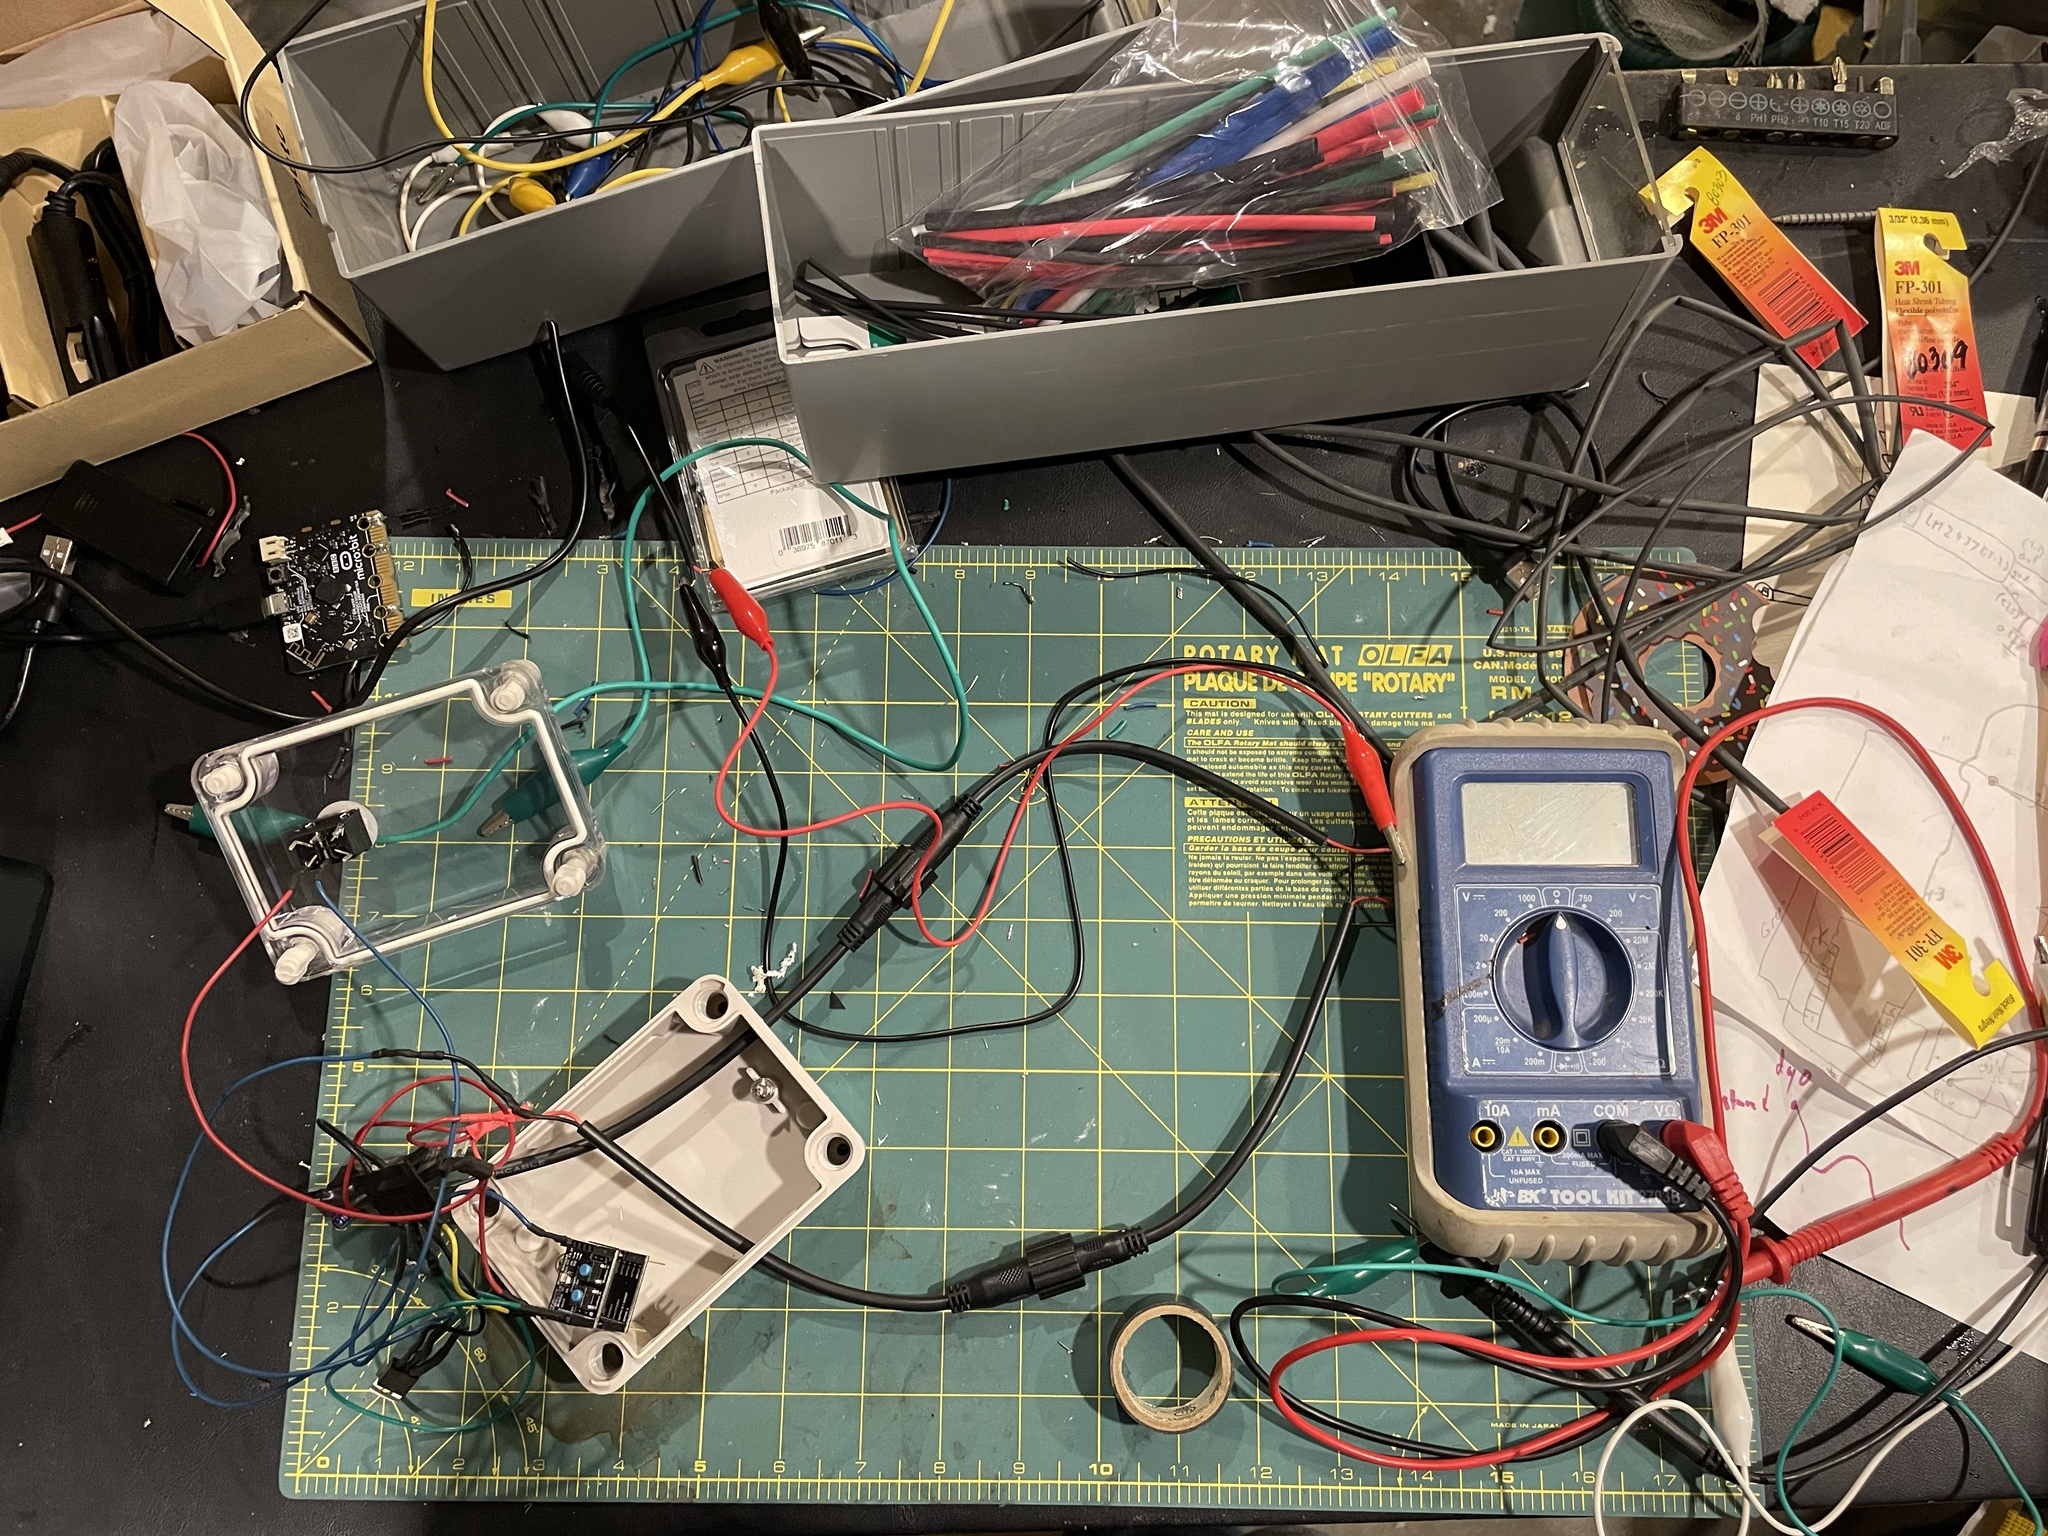 view of a table from above with scattered electronics parts and wires